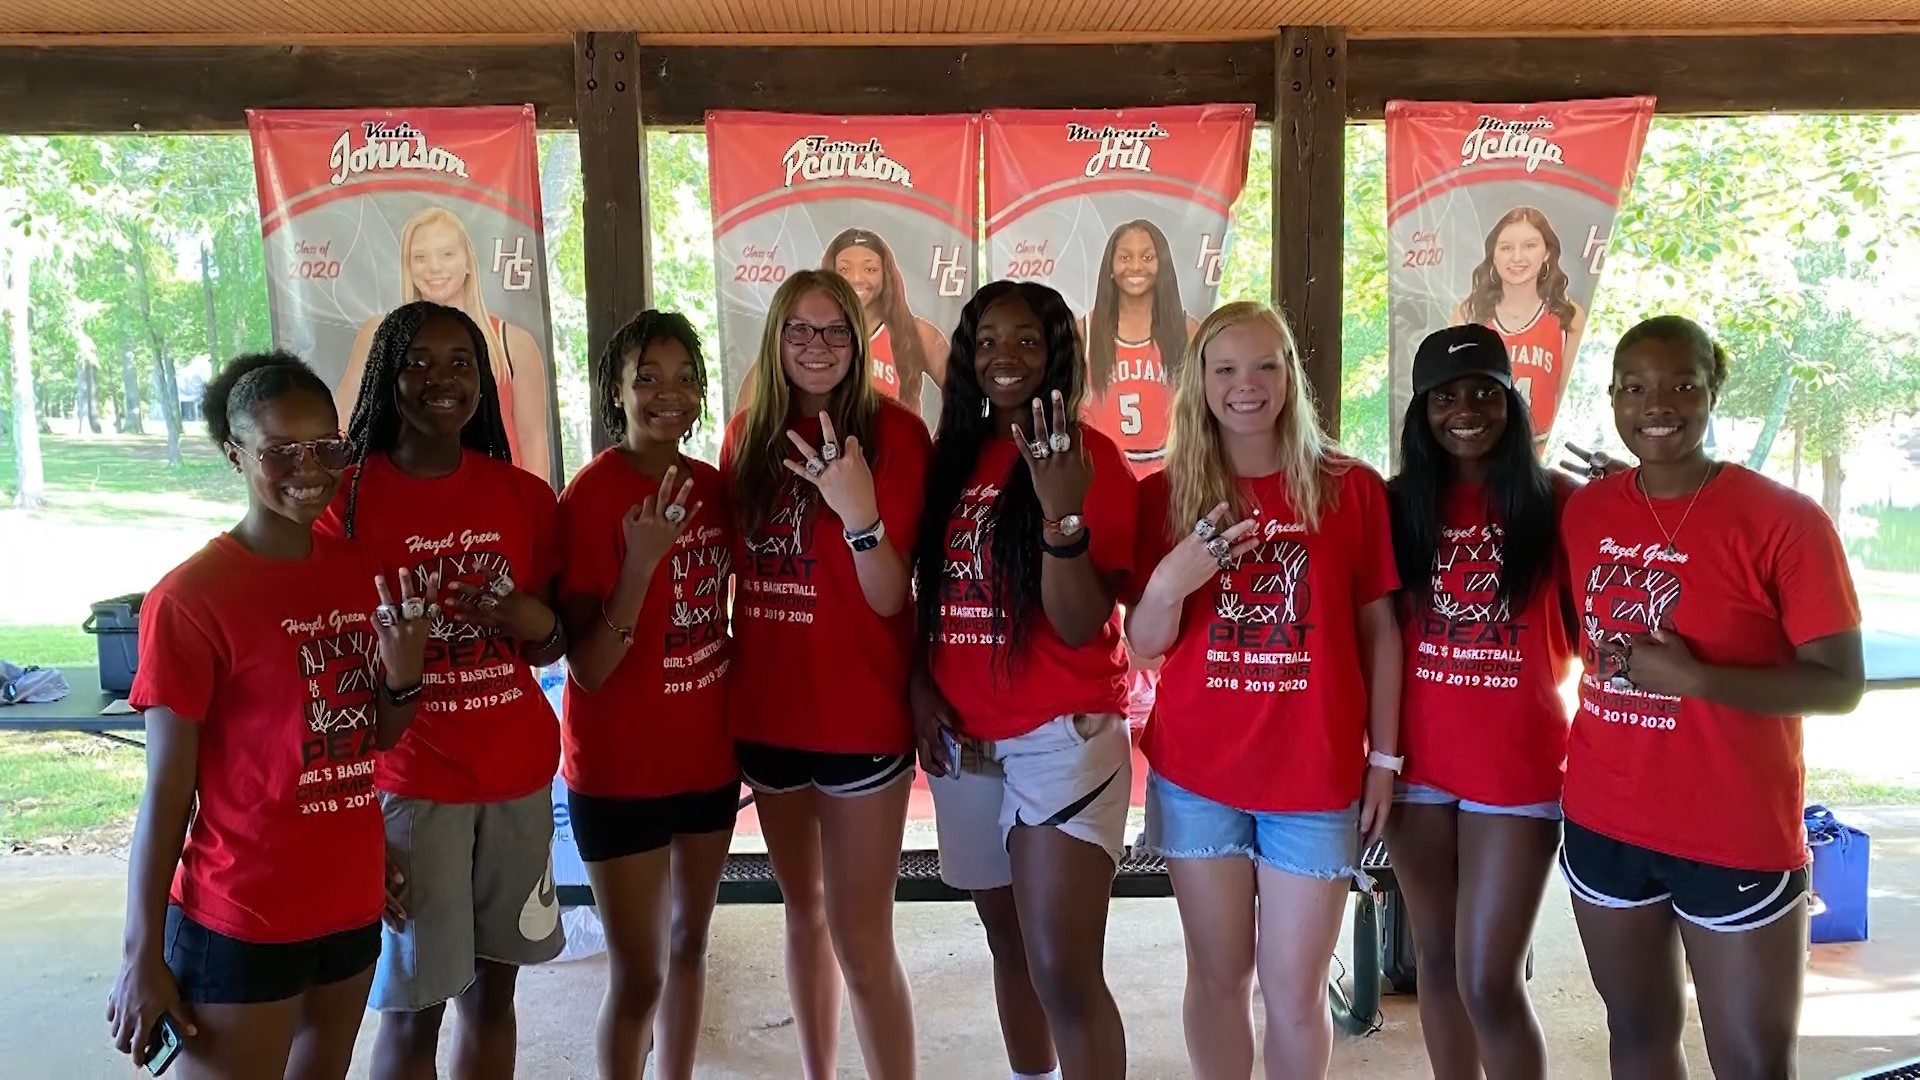 The three-time defending state 6A basketball champions, The Hazel Green Lady Trojans held a ring ceremony on Saturday.